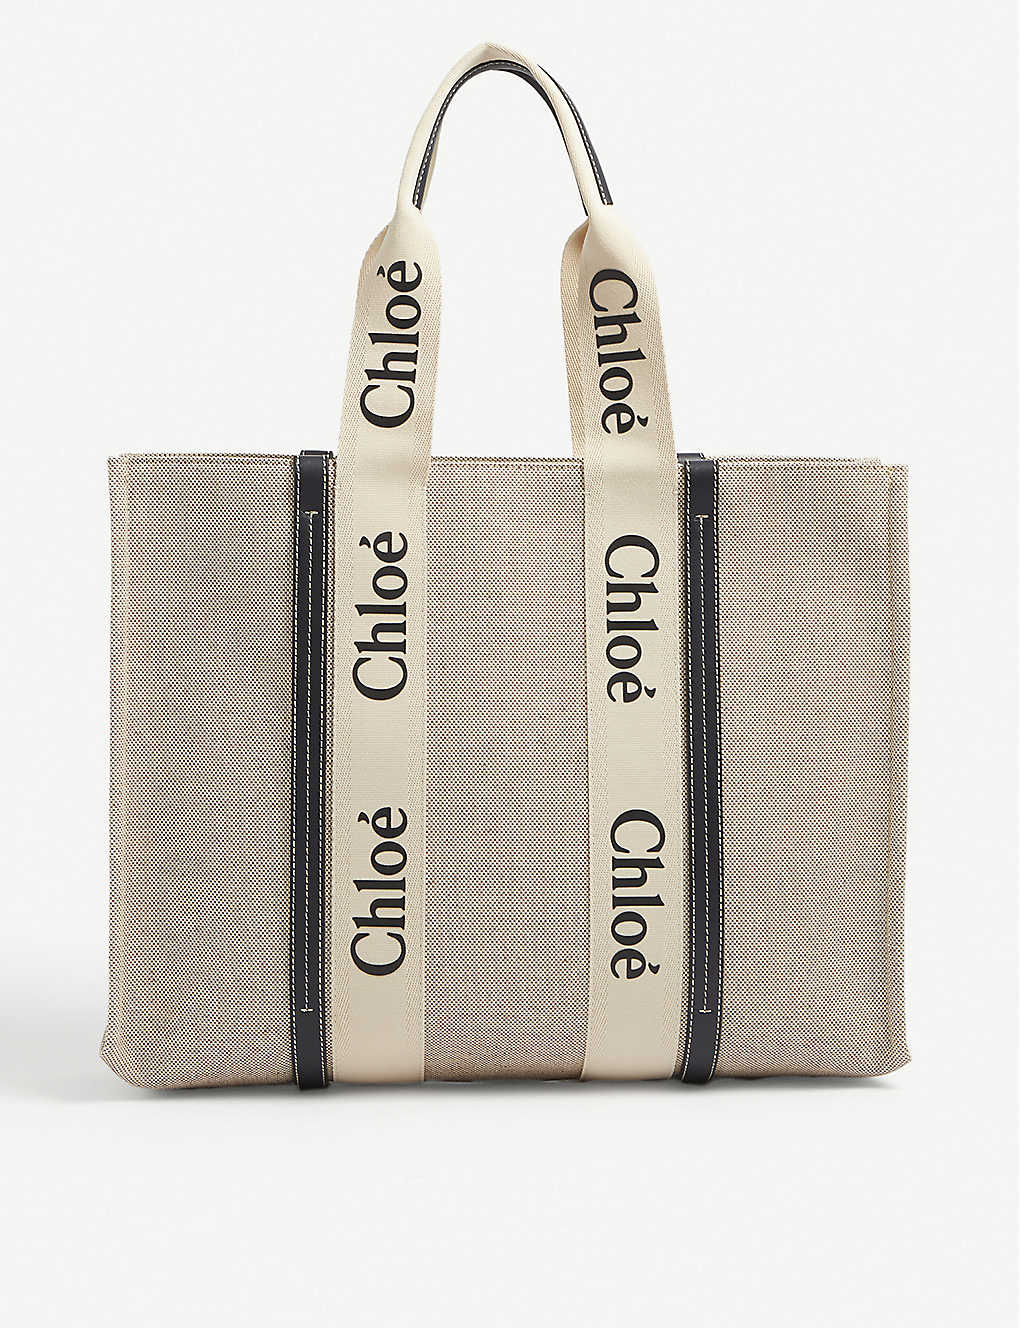 CHLOE - Woody large canvas and leather tote bag | Selfridges.com